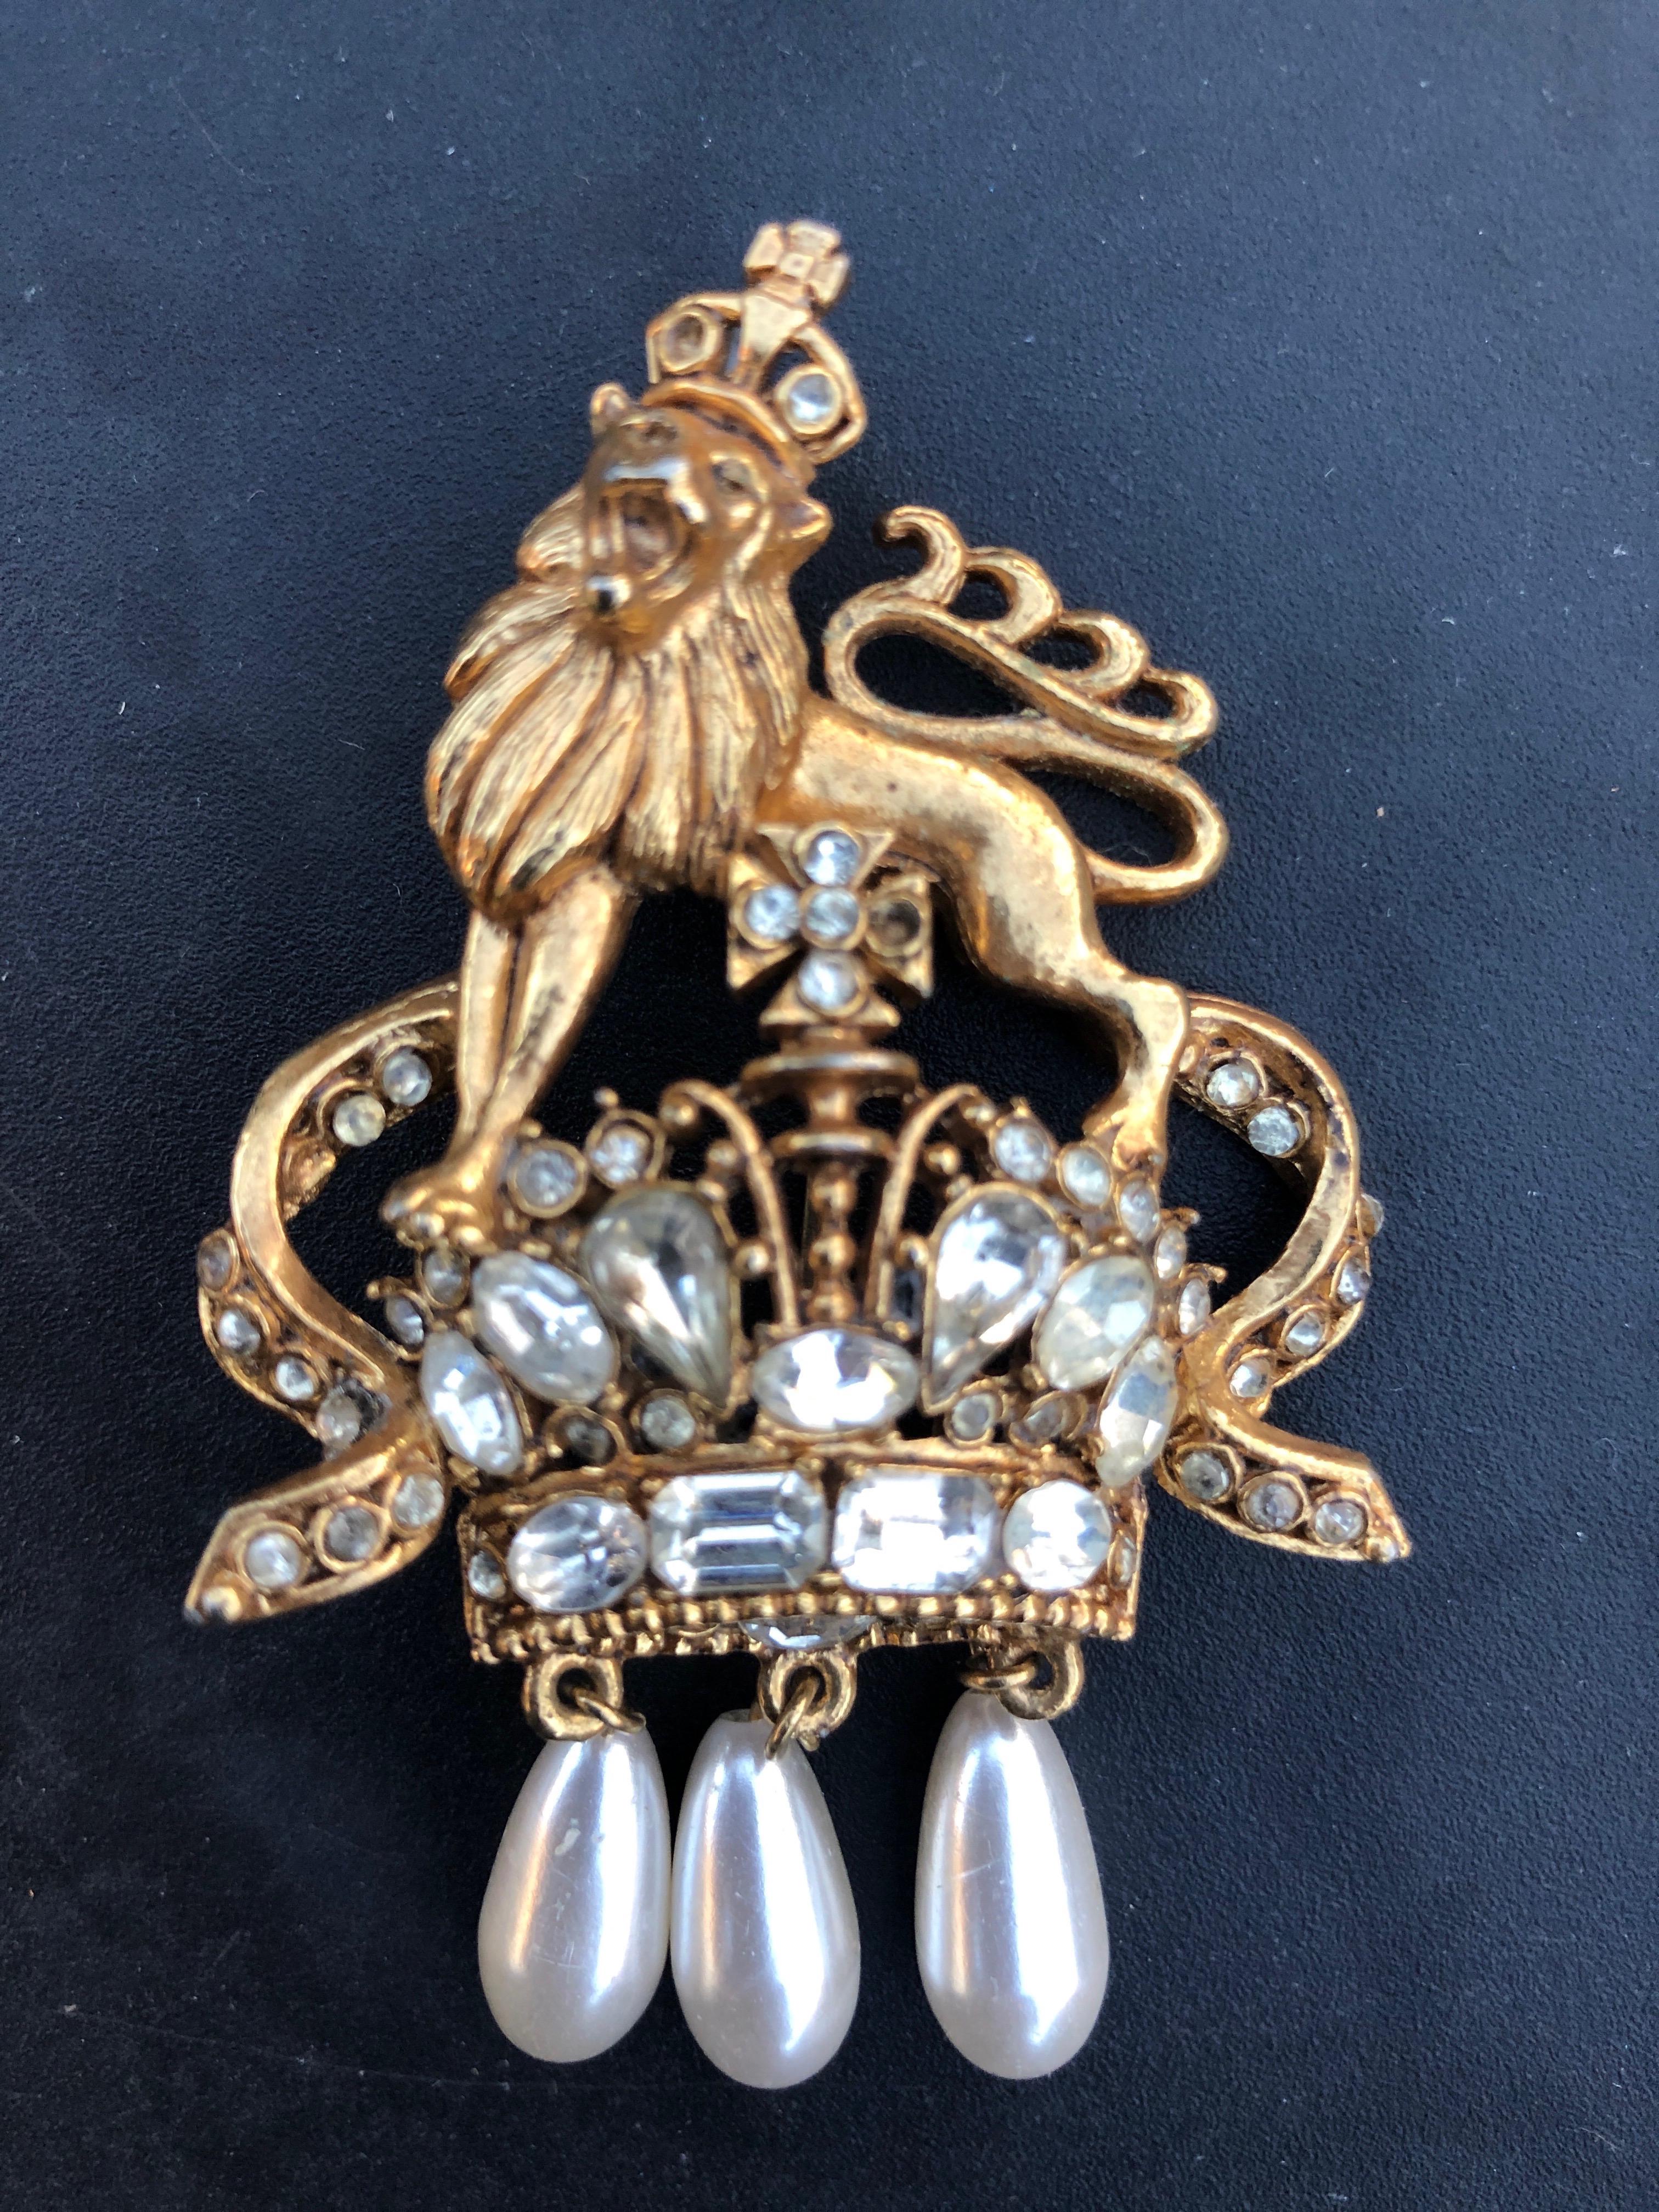 Women's or Men's 1984 R. Serbin Crystal Rampant Lion Royal Crest Brooch Pin with Pearl Drops